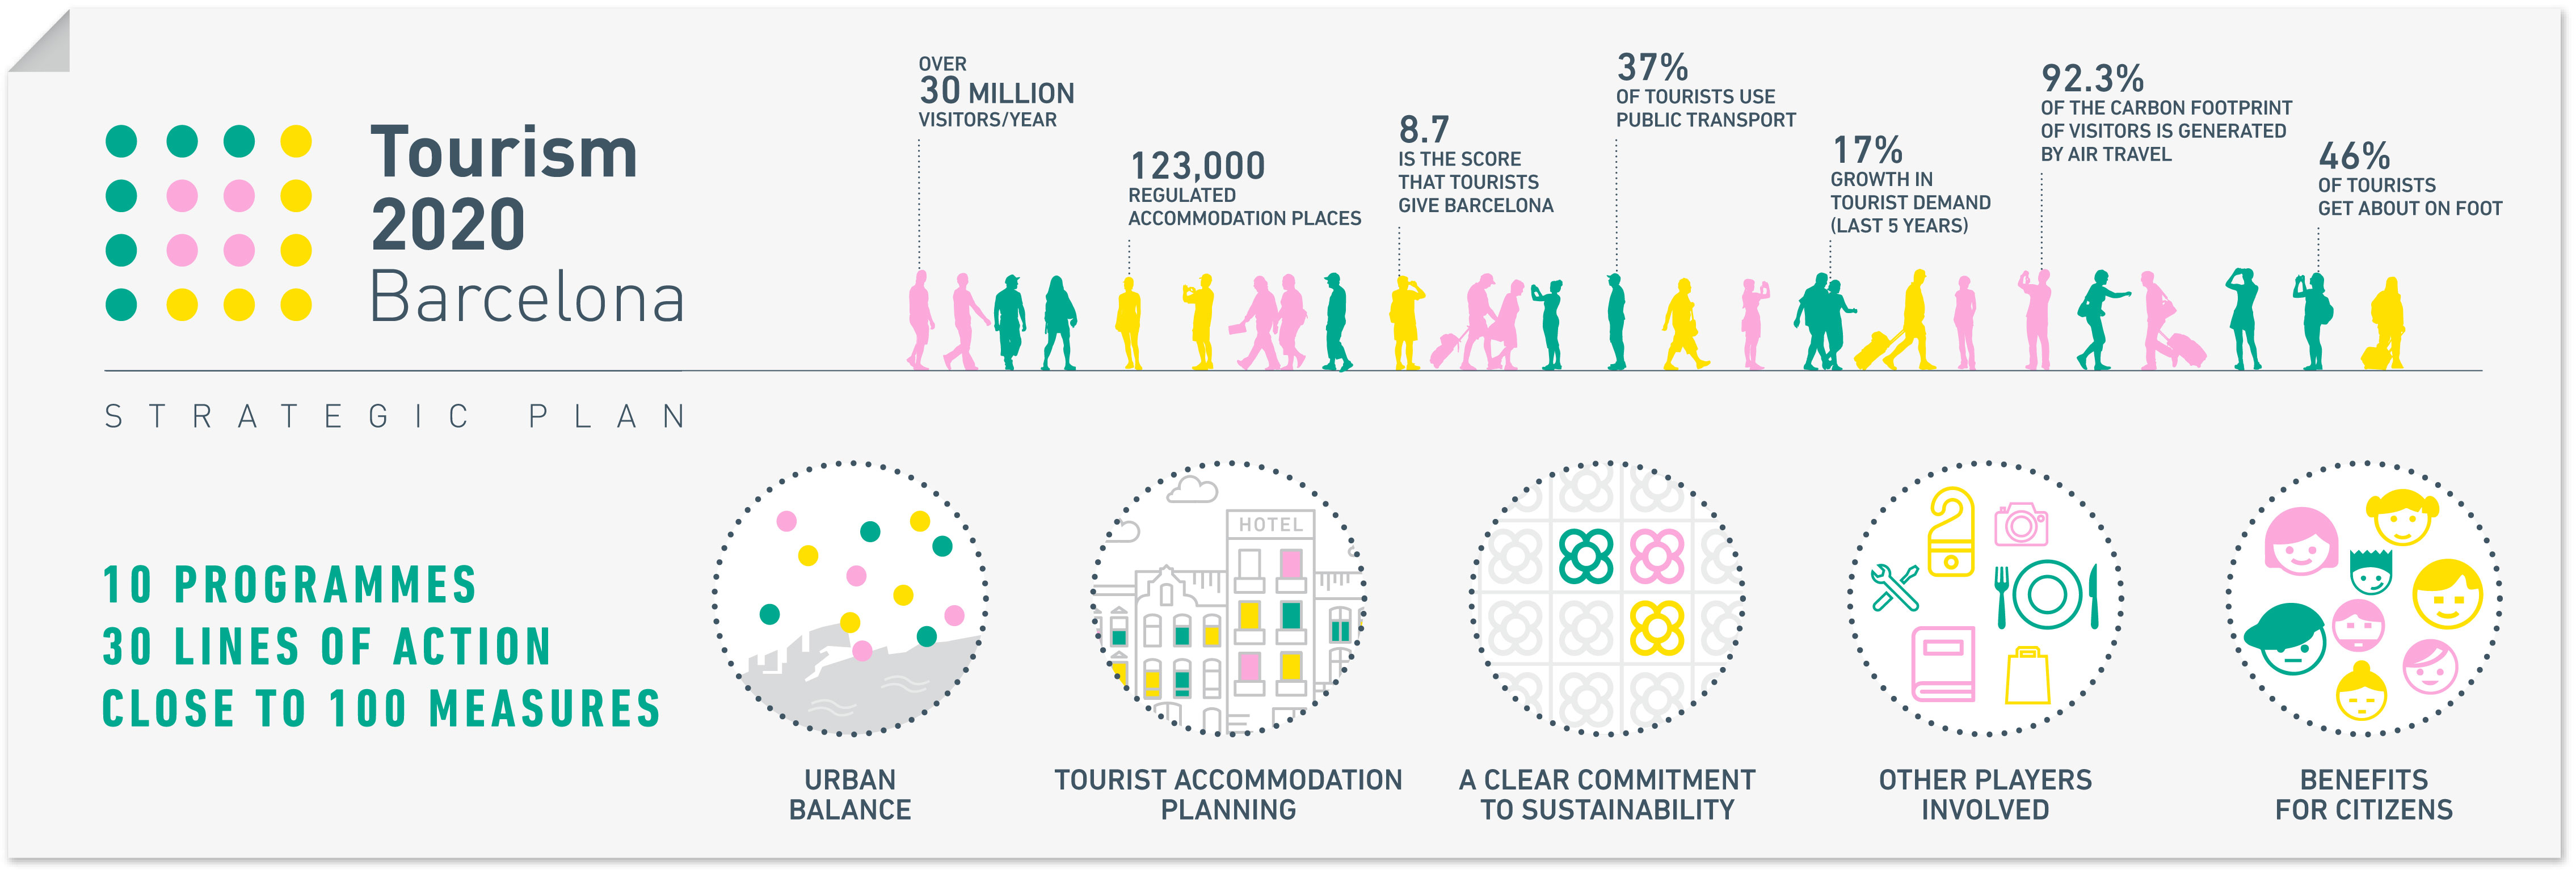 positive impacts of tourism in barcelona